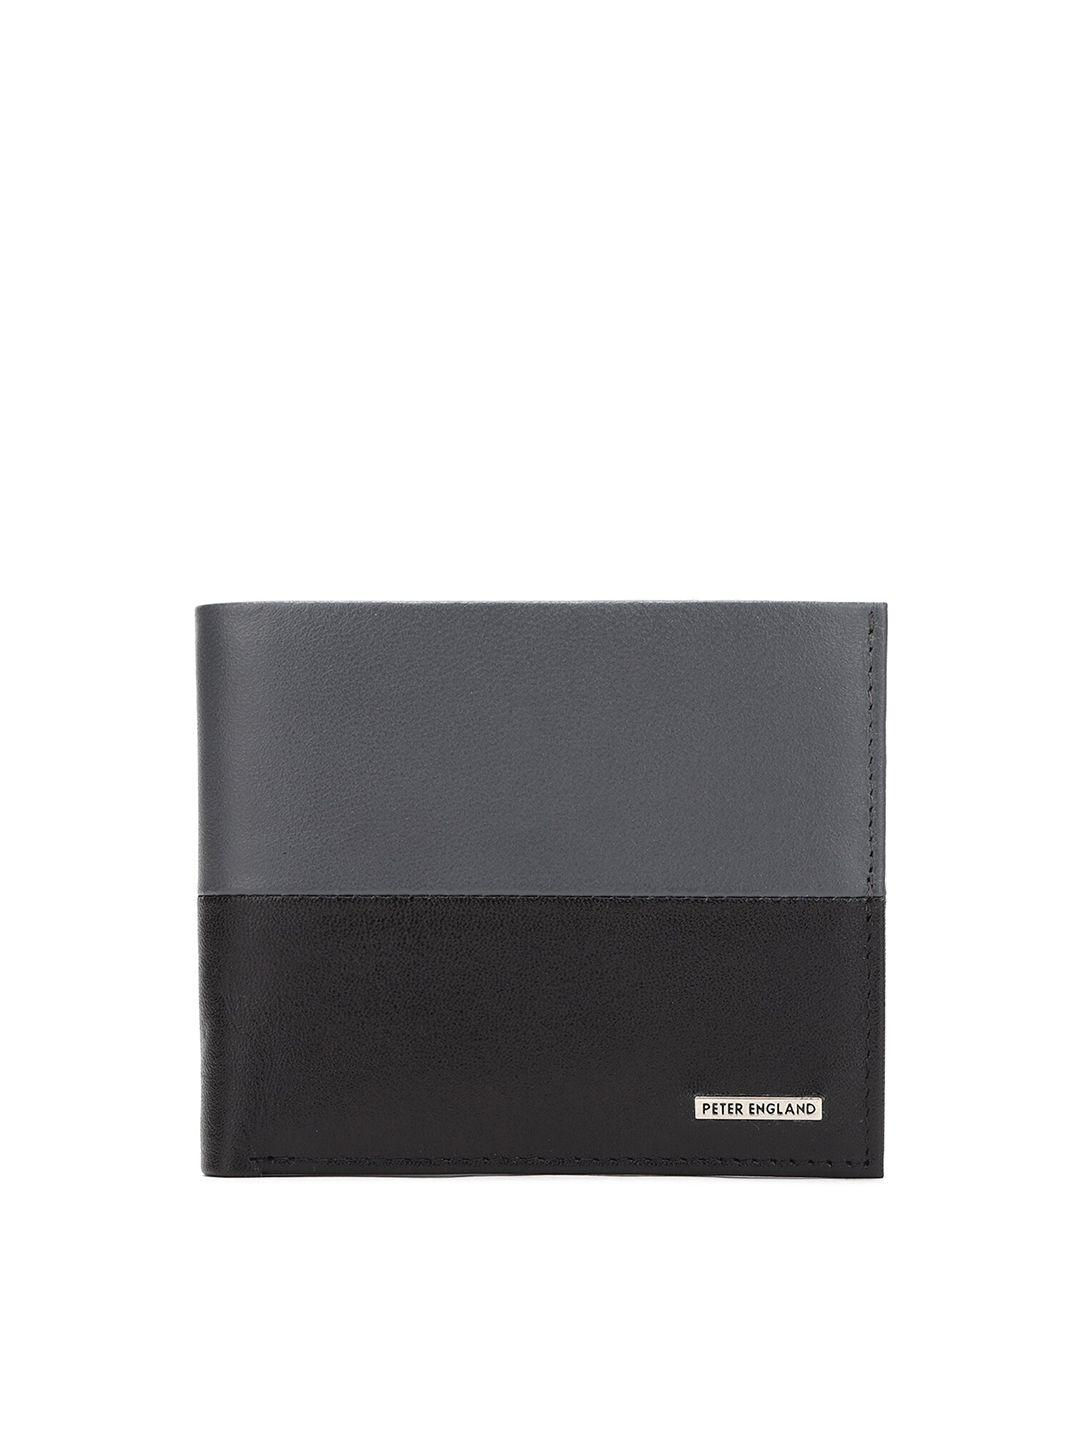 Peter England Men Grey & Black Colourblocked Leather Two Fold Wallet